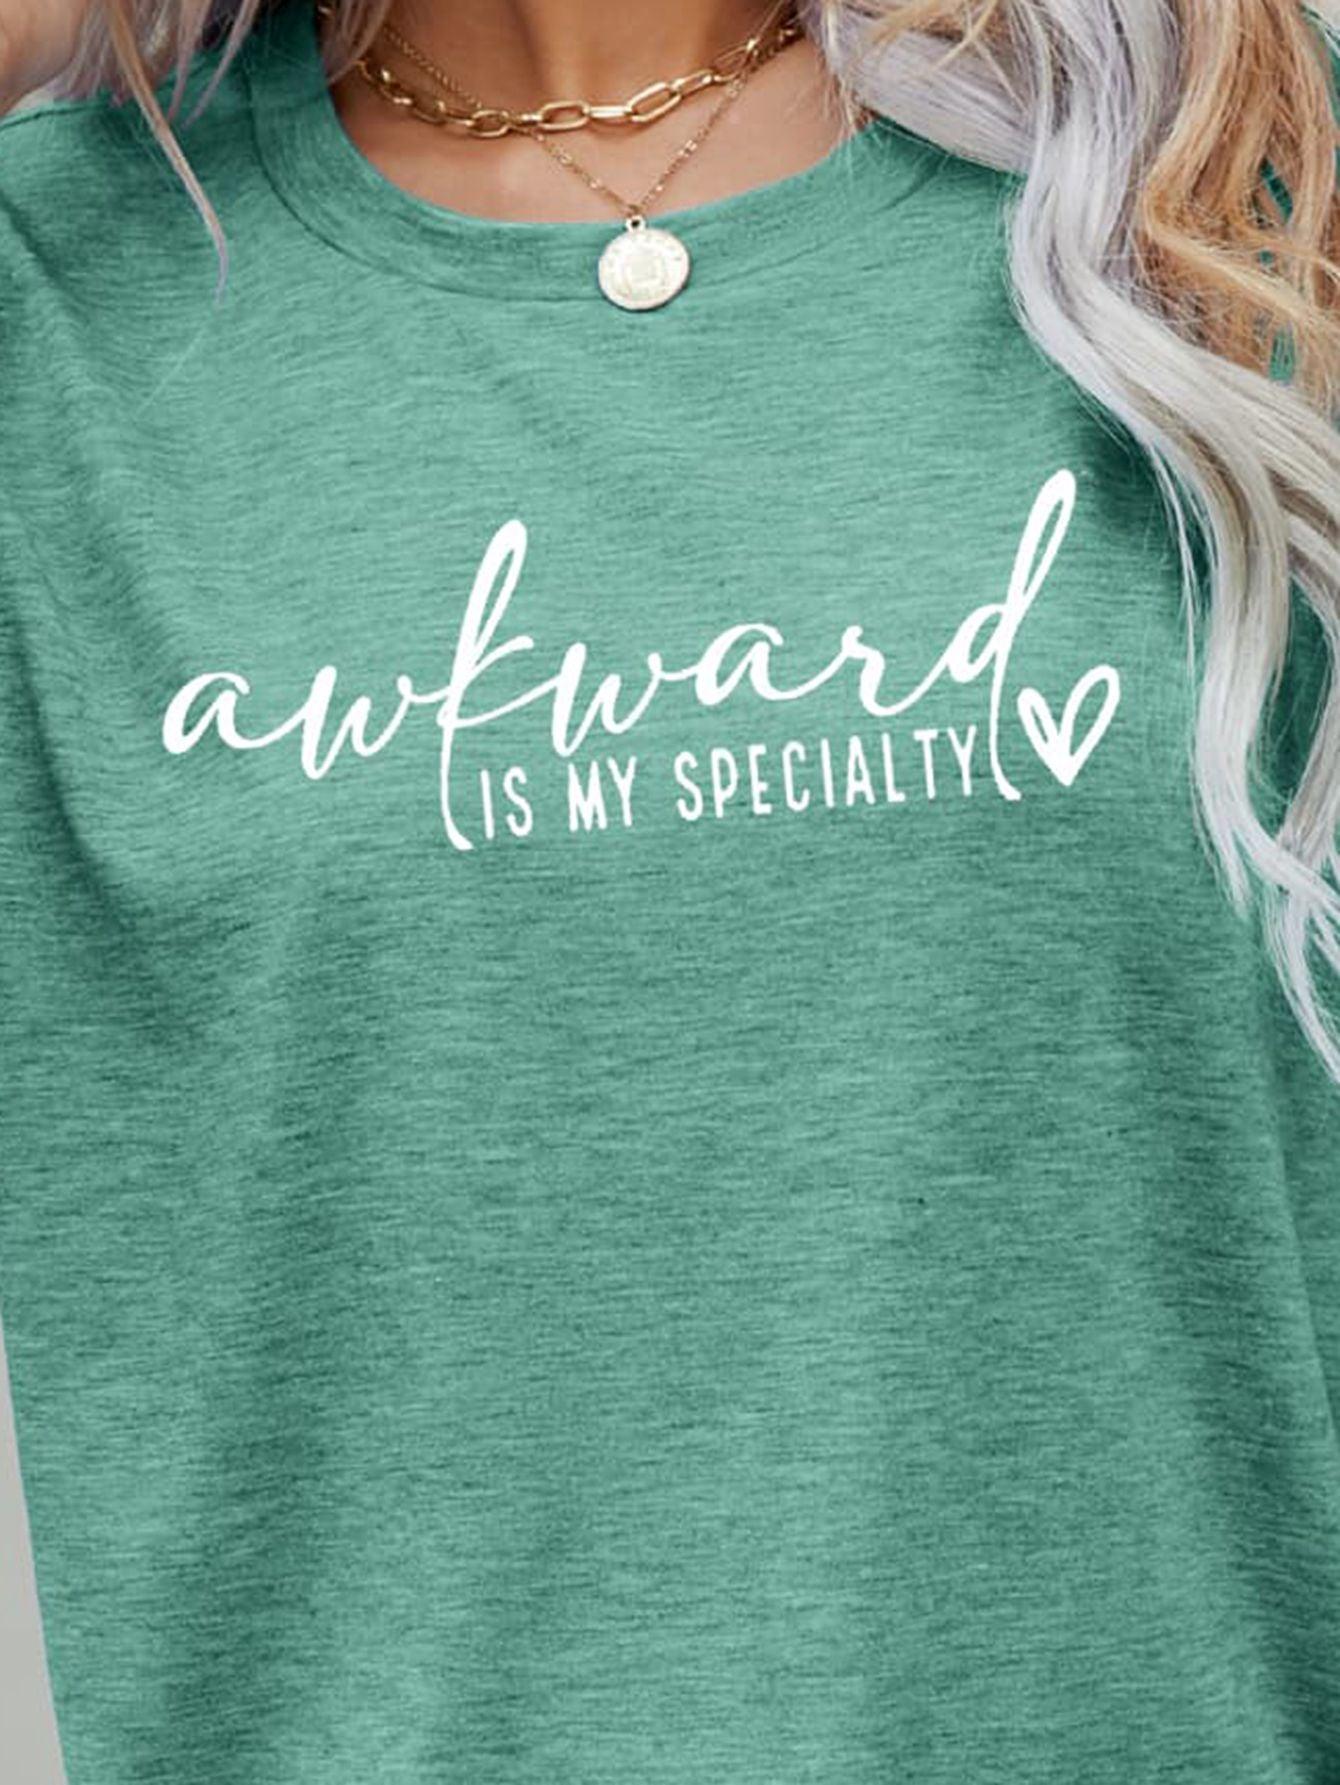 AWKWARD IS MY SPECIALTY Graphic Tee - Lab Fashion, Home & Health